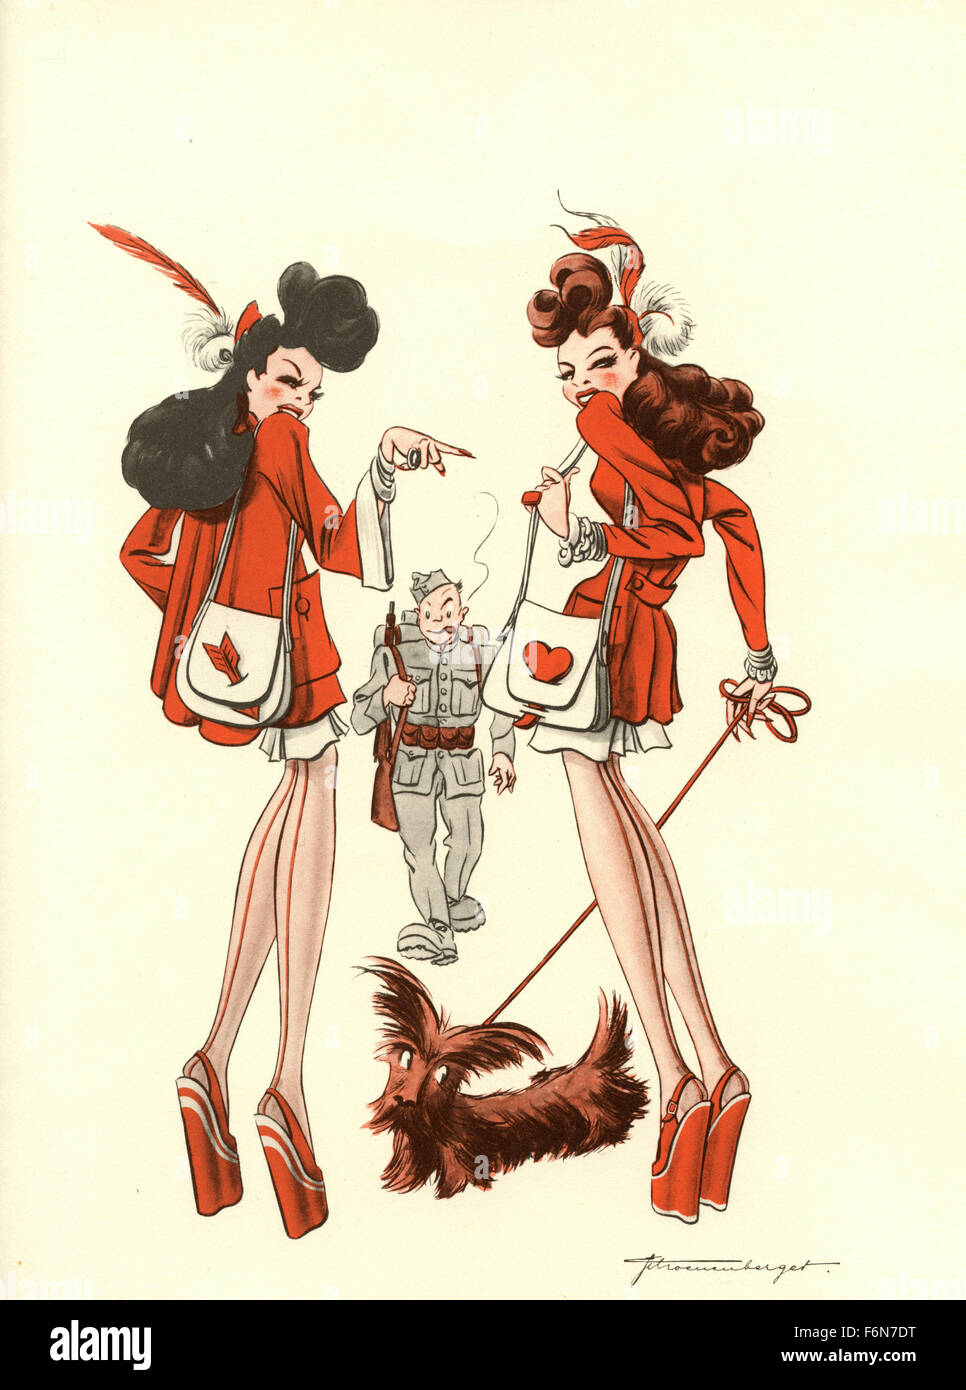 German satirical illustrations 1950: Two women, a dog, and a soldier Stock Photo